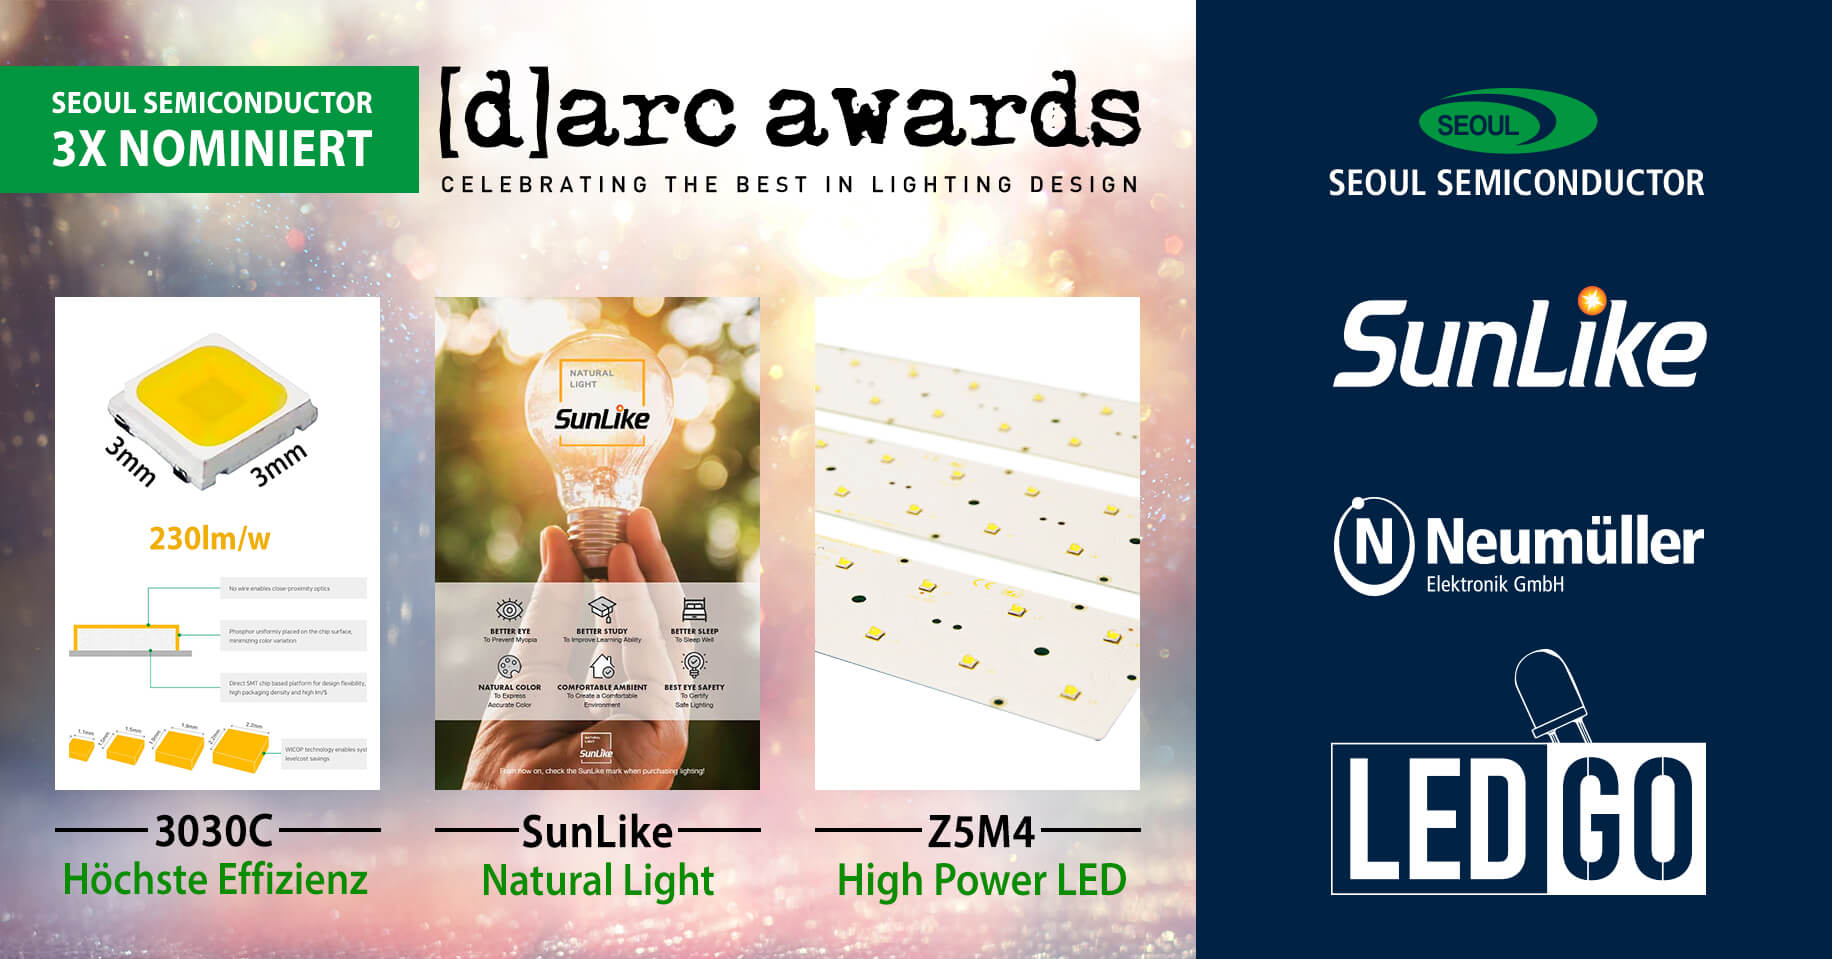 3 products from Seoul Semiconductor were nominated for the darc Awards